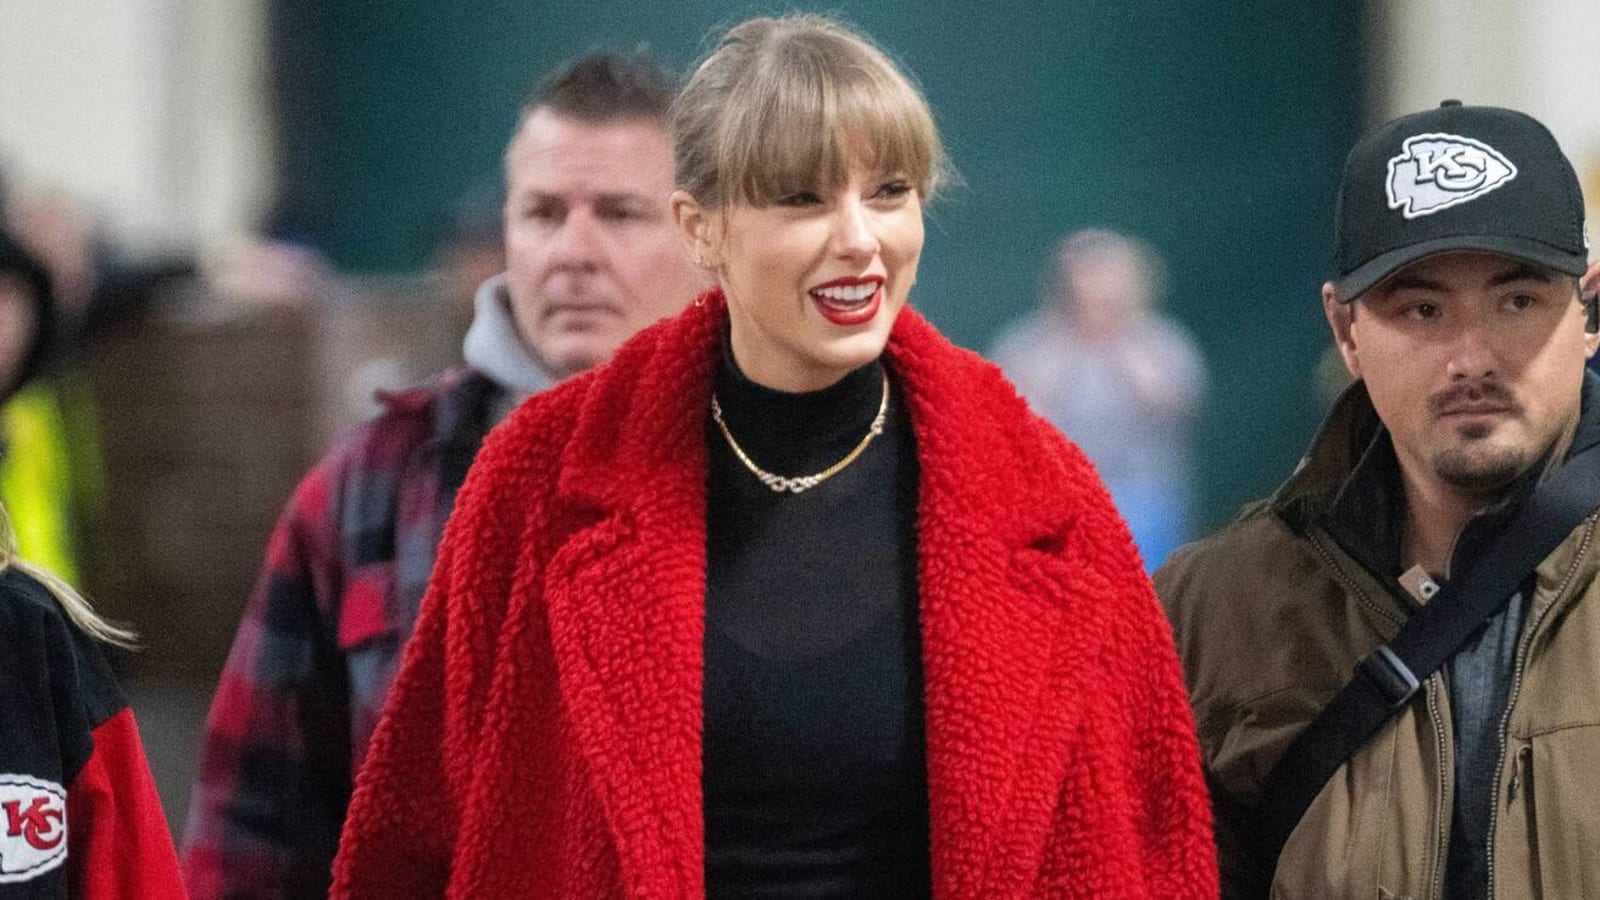 Watch: Taylor Swift arrives to Chiefs game with Santa Claus